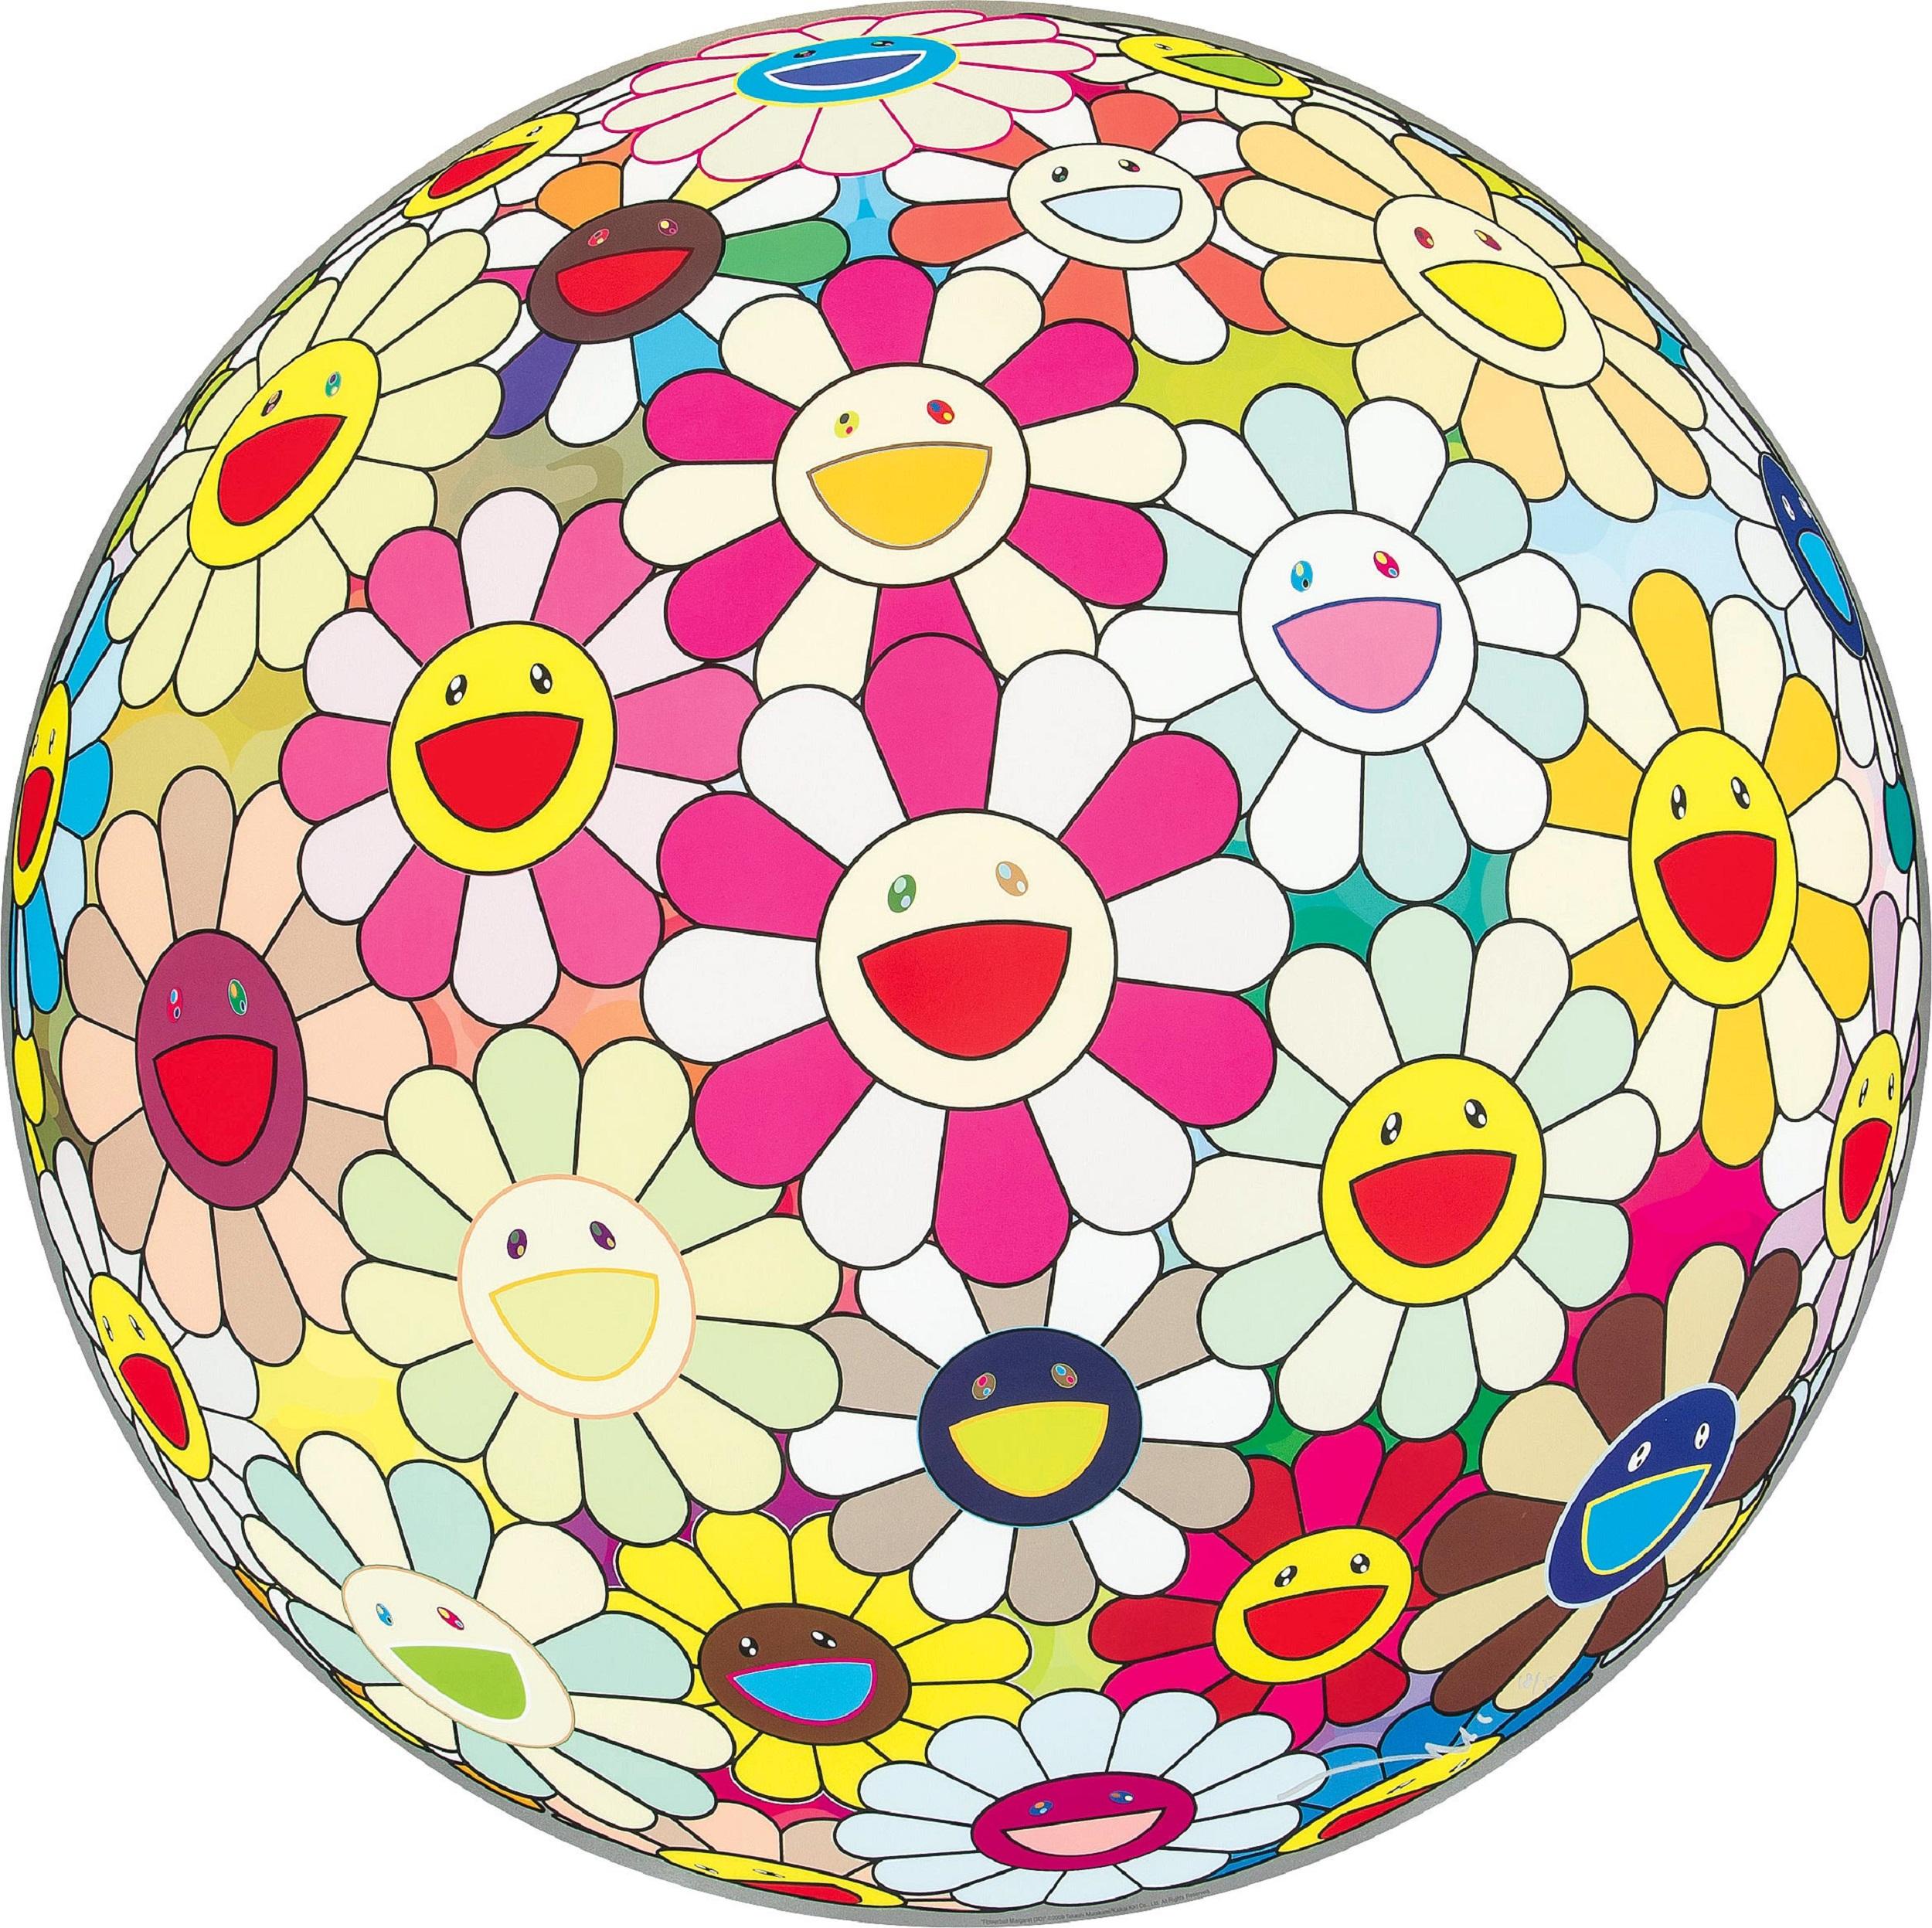 Flowerball Margareth (3D). Limited edition (print) by Murakami signed, numbered